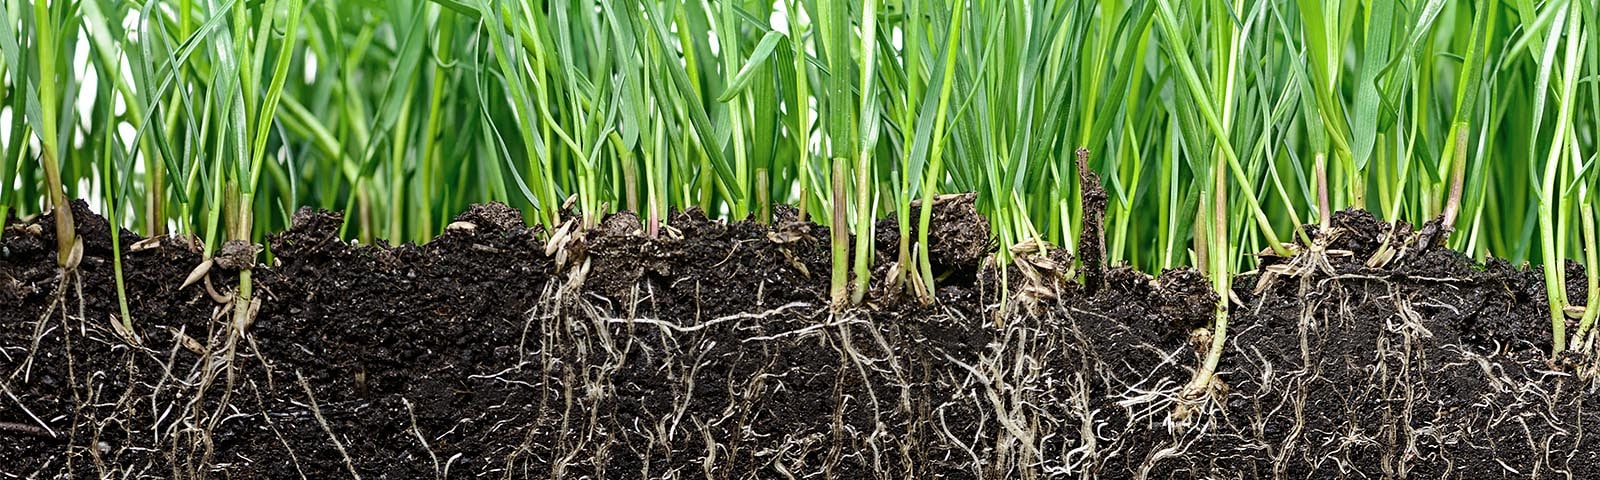 Grass with healthy roots in soil